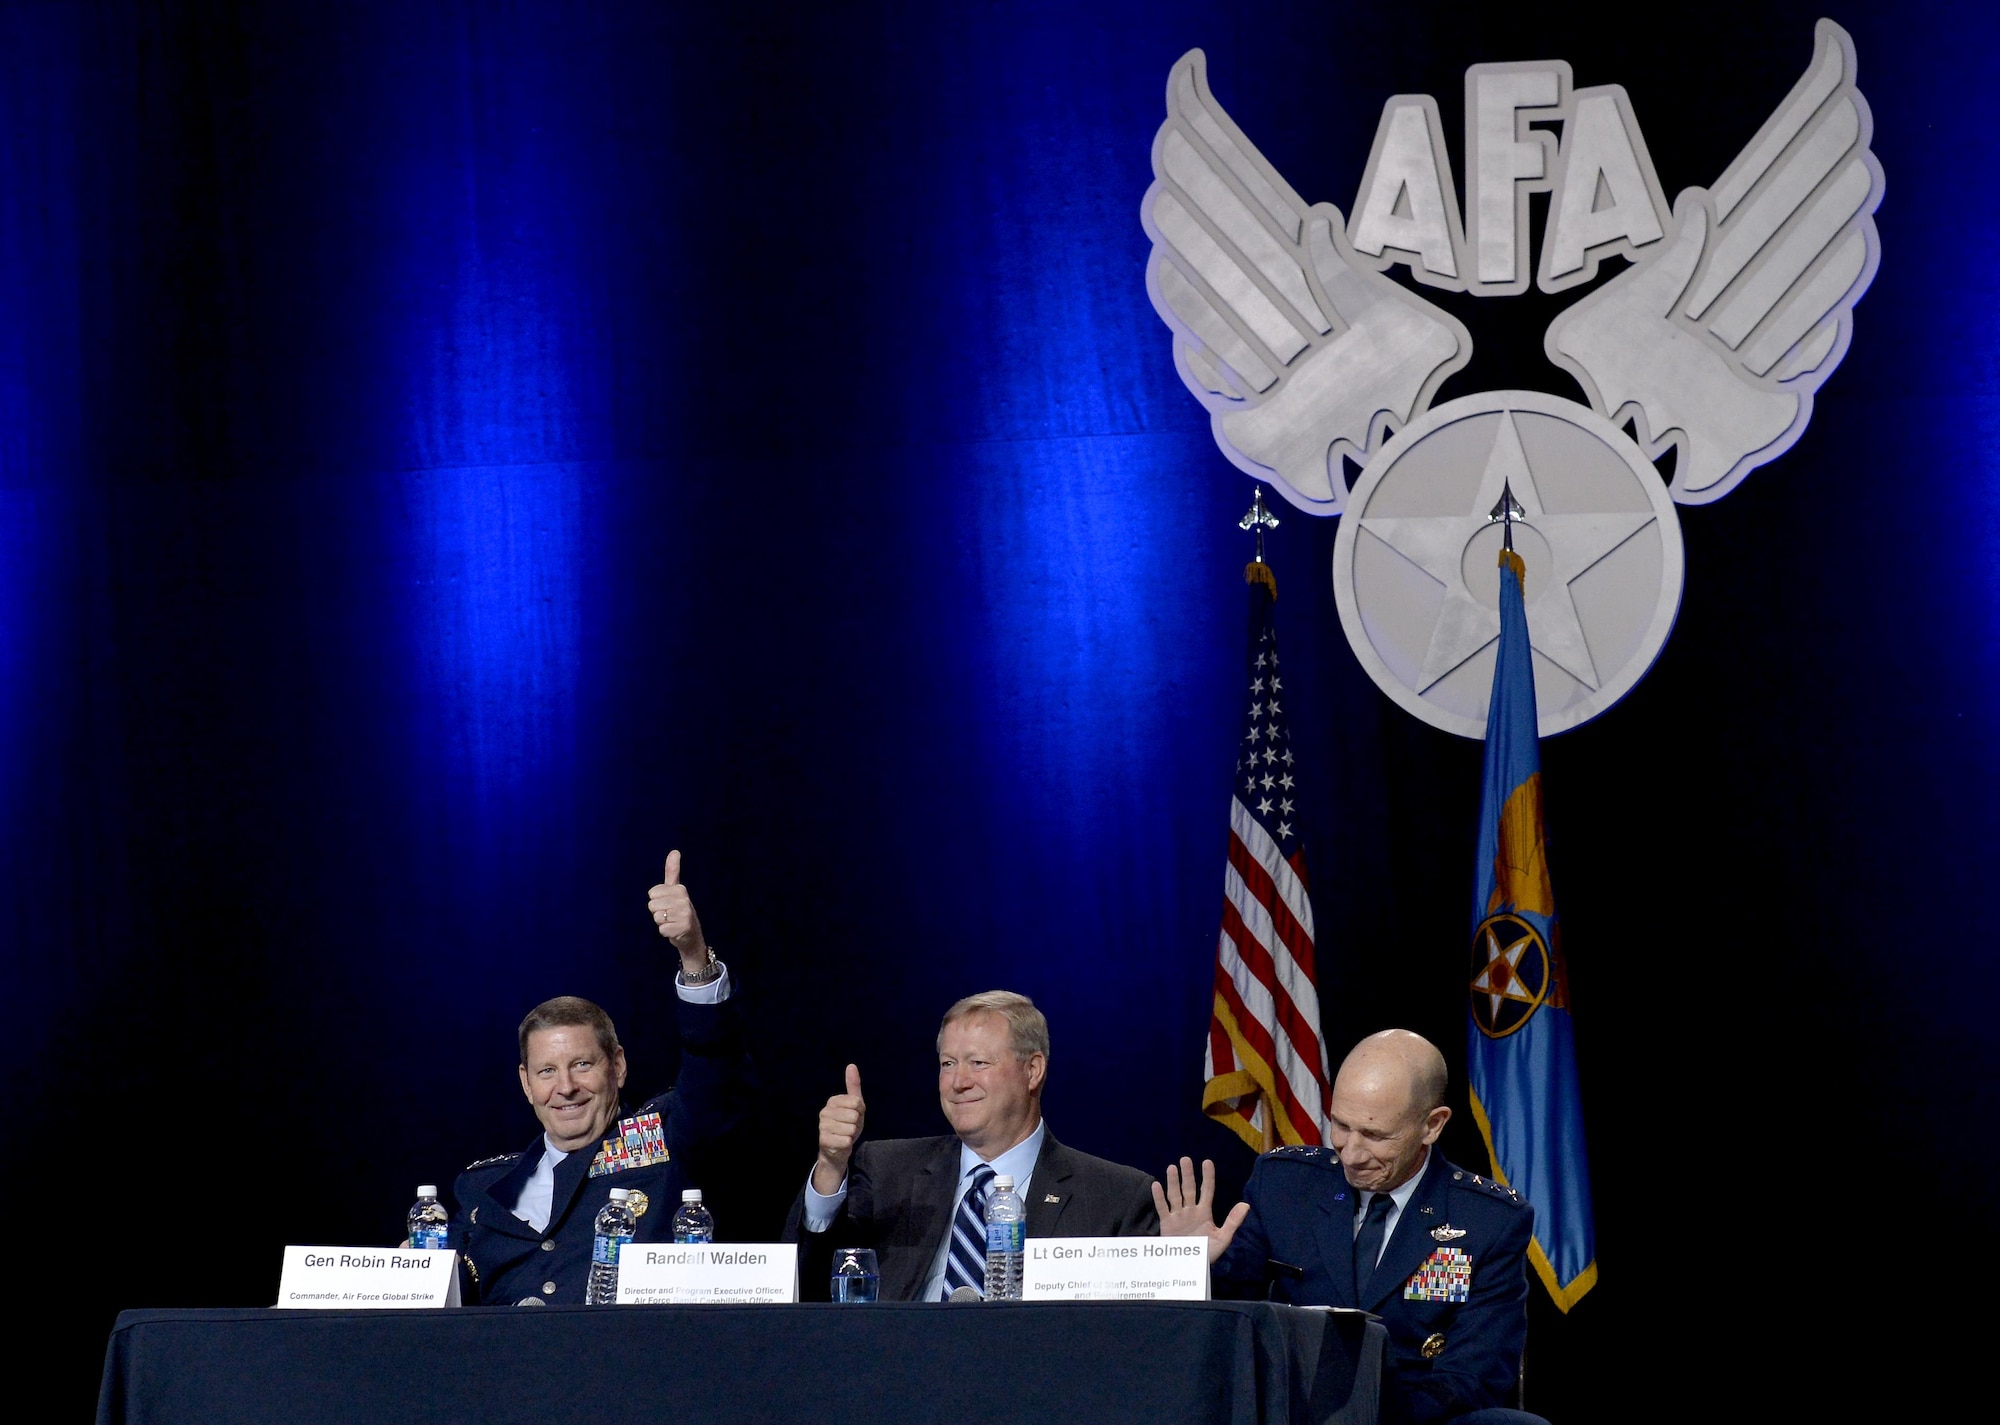 Gen. Robin Rand, the Air Force Global Strike Command commander, Randall G. Walden, the director and program executive officer of the Air Force Rapid Capabilities Office, and Lt. Gen. James Holmes, the deputy chief of staff, strategic plans and requirements, gives a thumbs-up to the B-21 bomber's new name during the Air Force Association's Air, Space and Cyber Conference in National Harbor, Md., Sept. 19, 2016. The B-21 will be known as the Raider. (U.S. Air Force photo/Staff Sgt. Whitney Stanfield)
